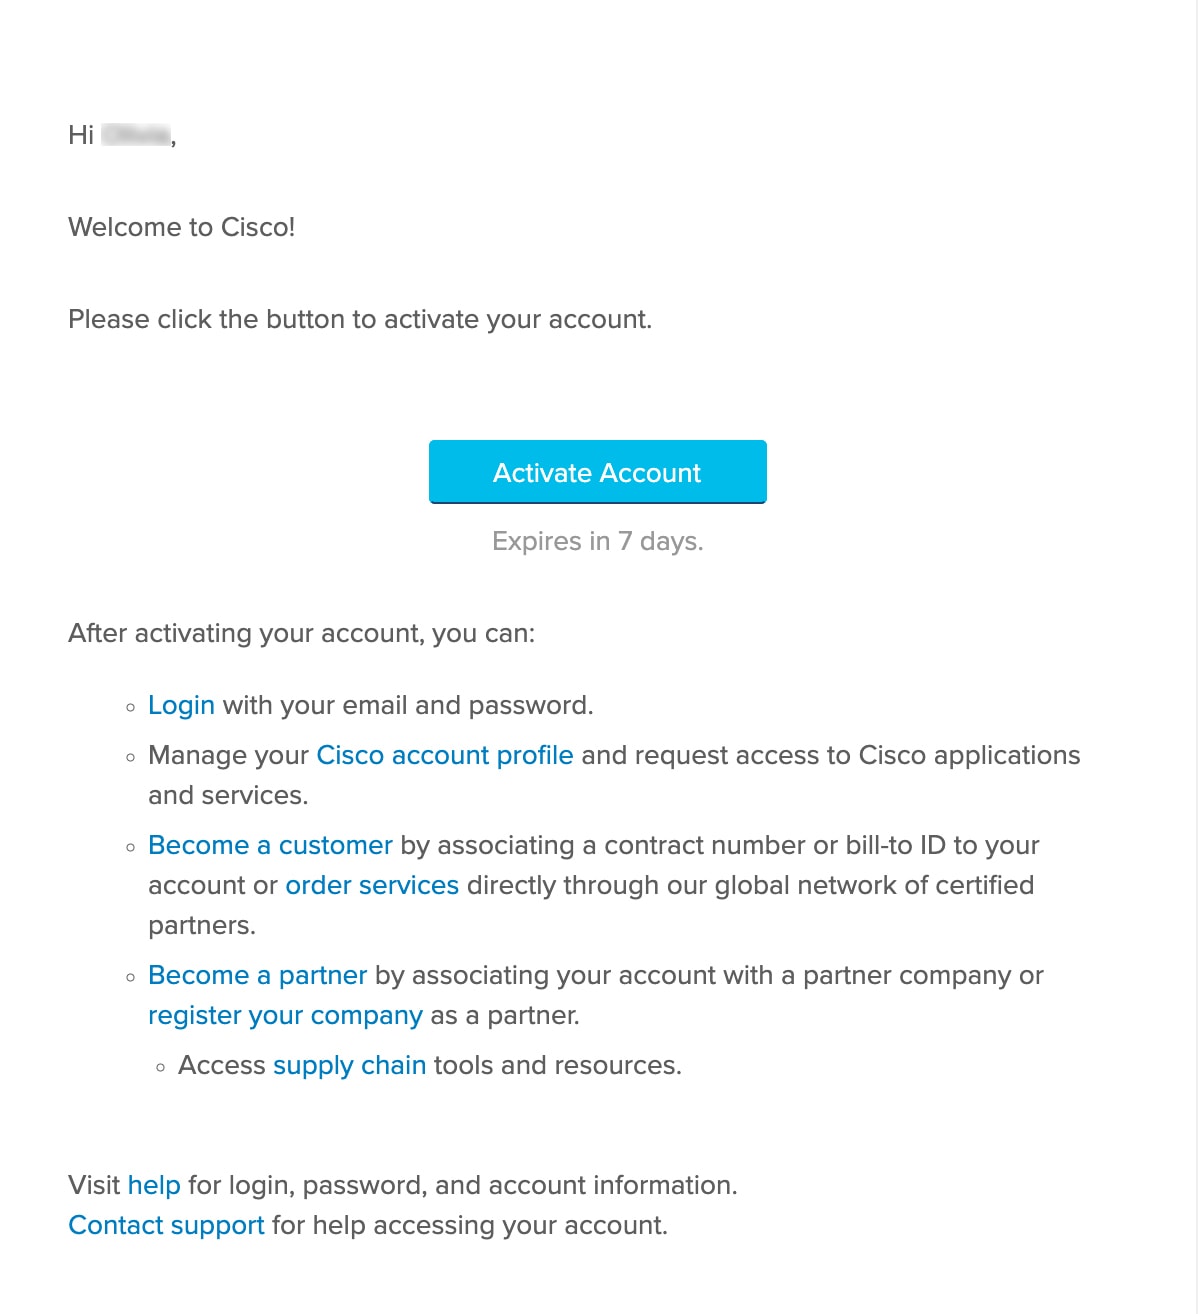 A Cisco email welcomes you to Cisco, requesting that you activate your account by clicking Activate Account.